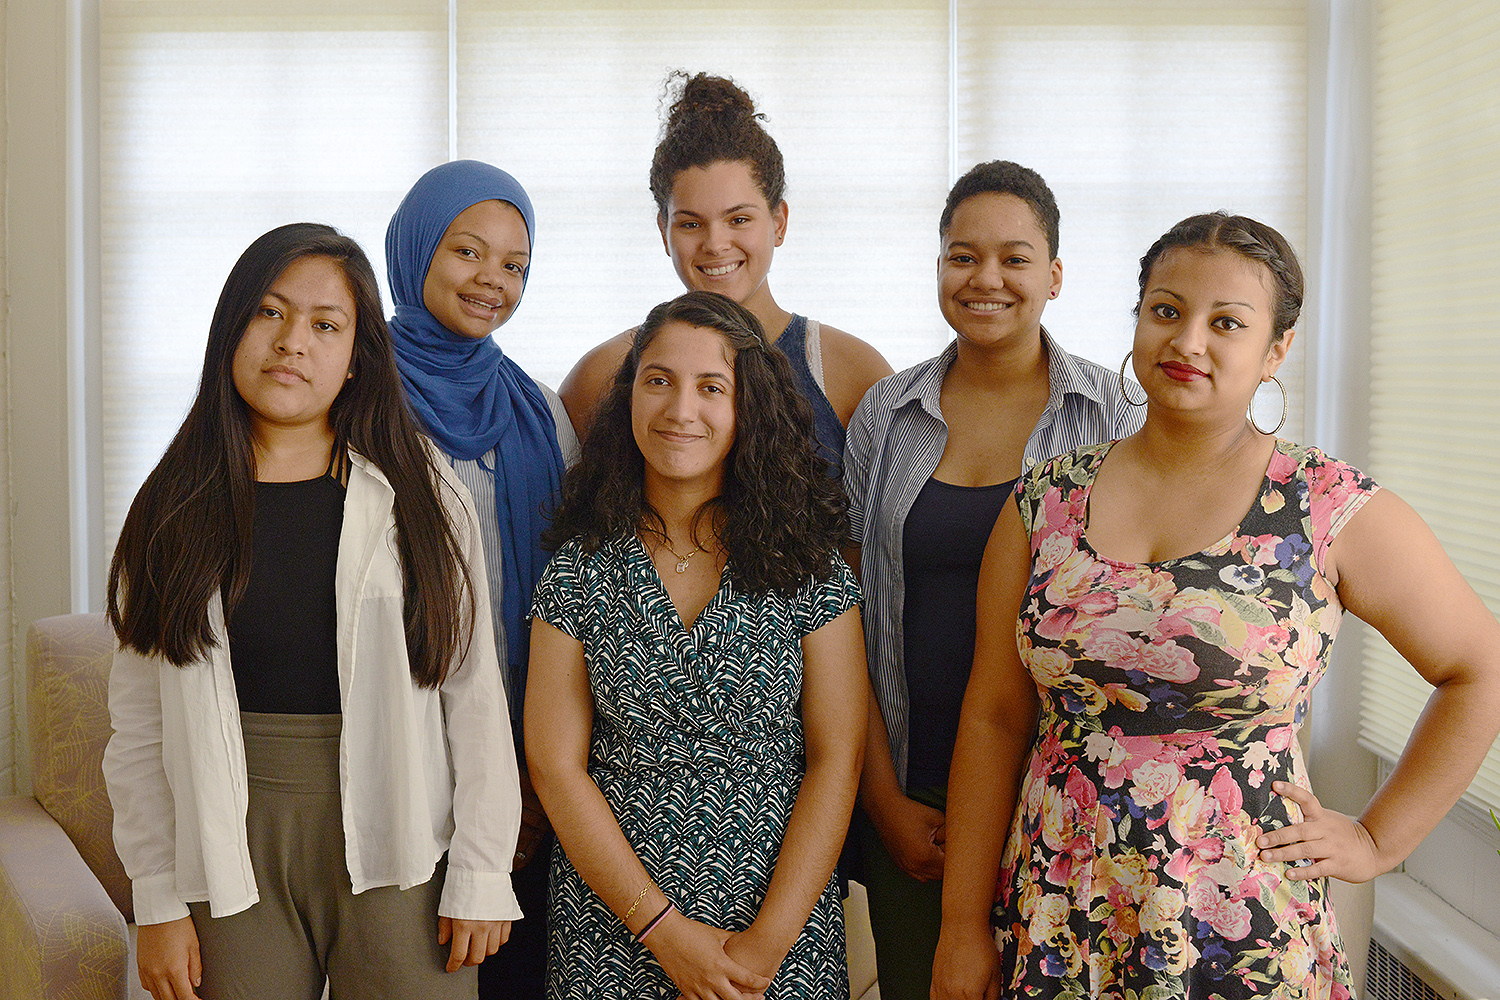 Pictured, from left, are Delia Tapia '18, Alicia Strong '18, Aura Ochoa '17, Iryelis Lopez '17 (back row), Paige Hutton '18 and Aleyda Robles '18. 